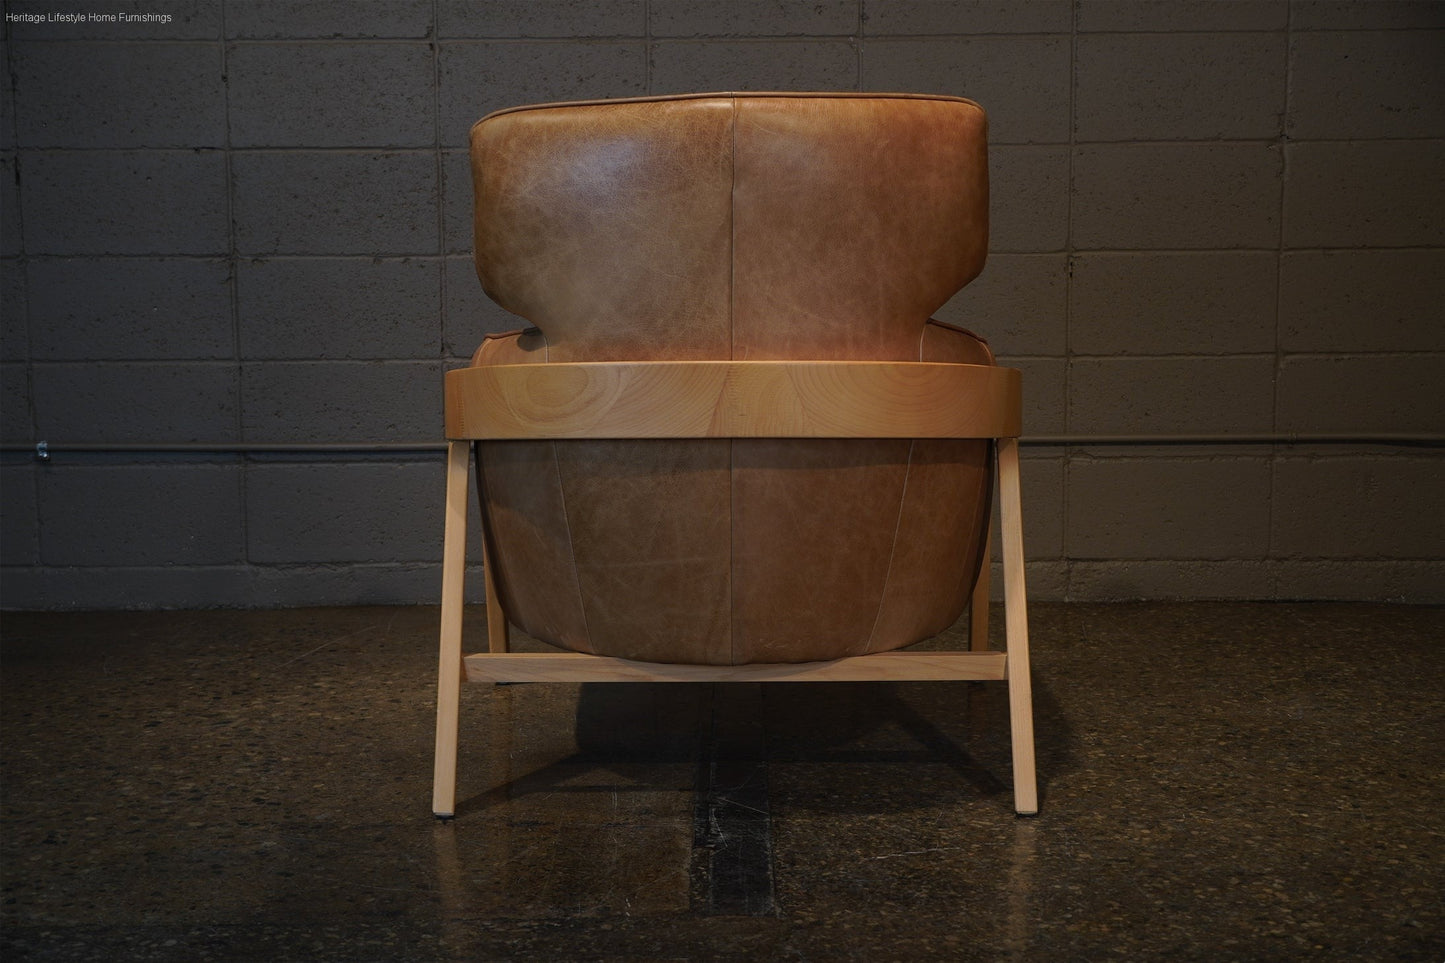 A993-1(2A) Leather Accent Chair - Whiskey Furniture Stores Burlington Ontario Near Me HLHF